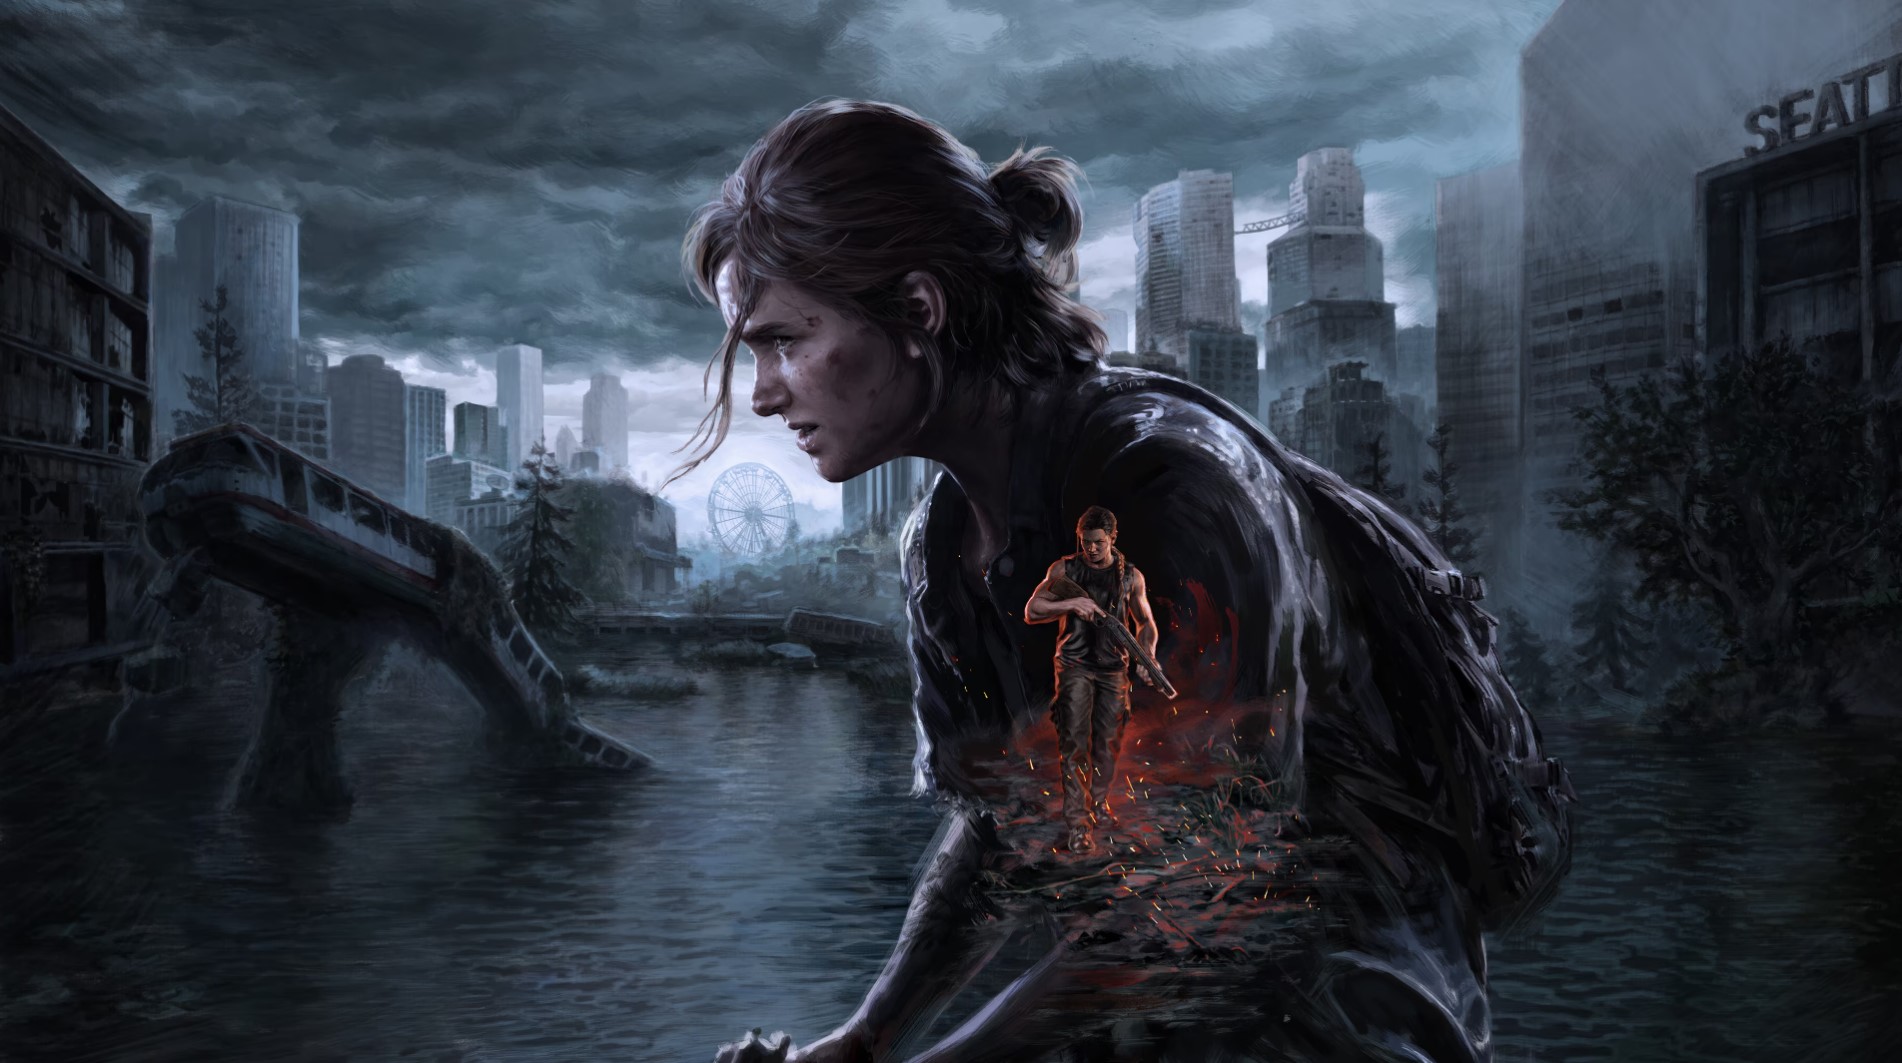 The Last of us Part 2